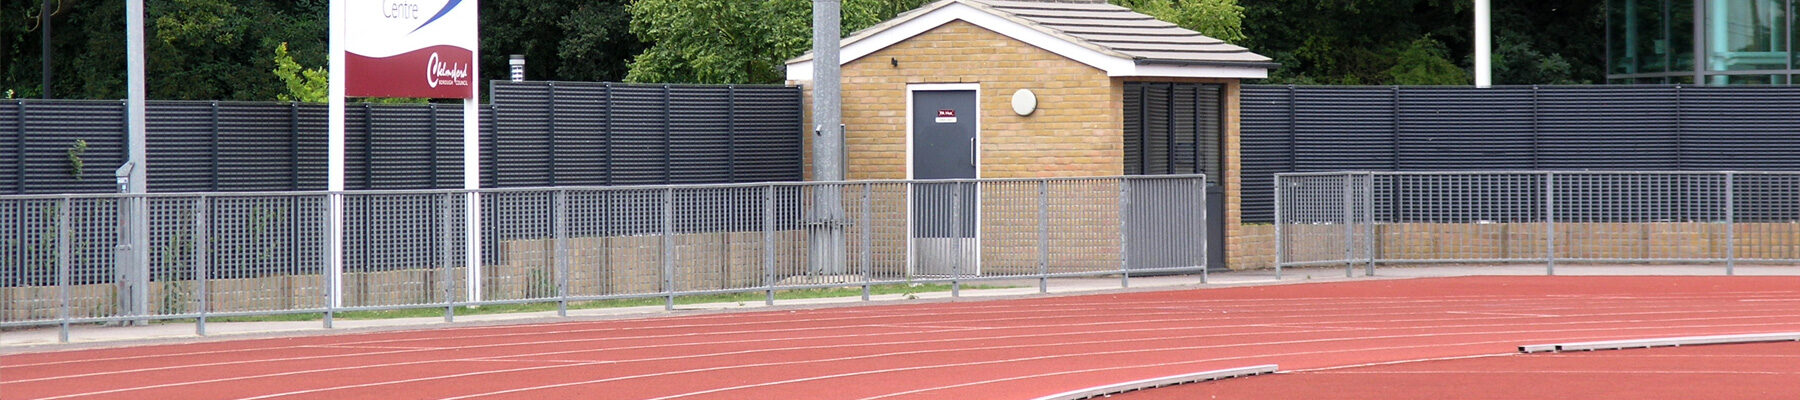 louvred fence provides visual screening at sports and athletics club